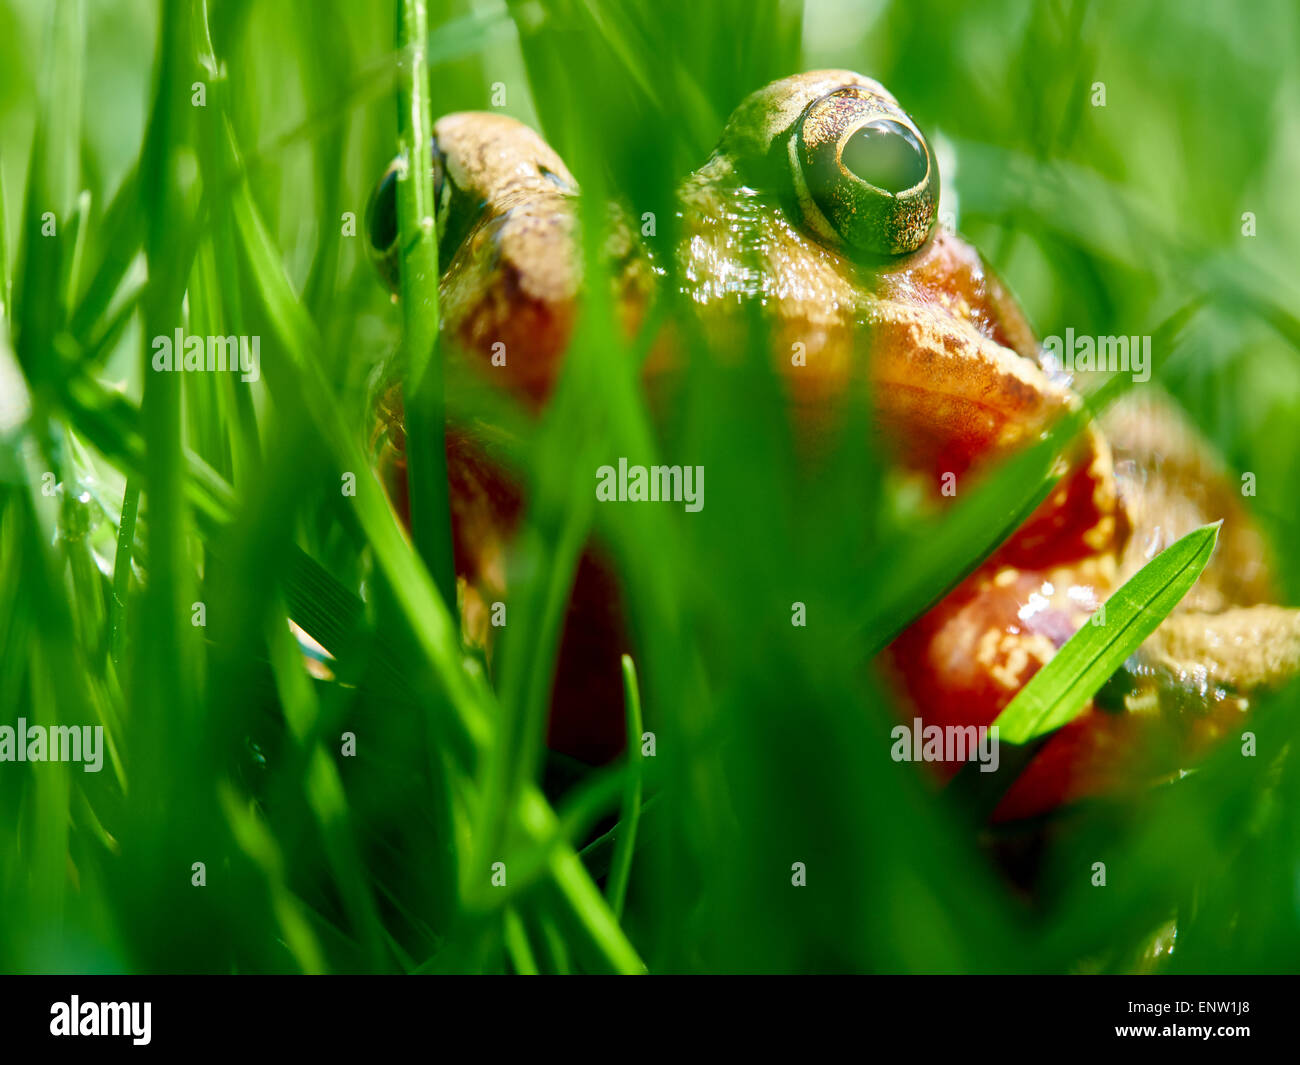 Frog peering through blades of grass on a garden lawn in Spring. Stock Photo